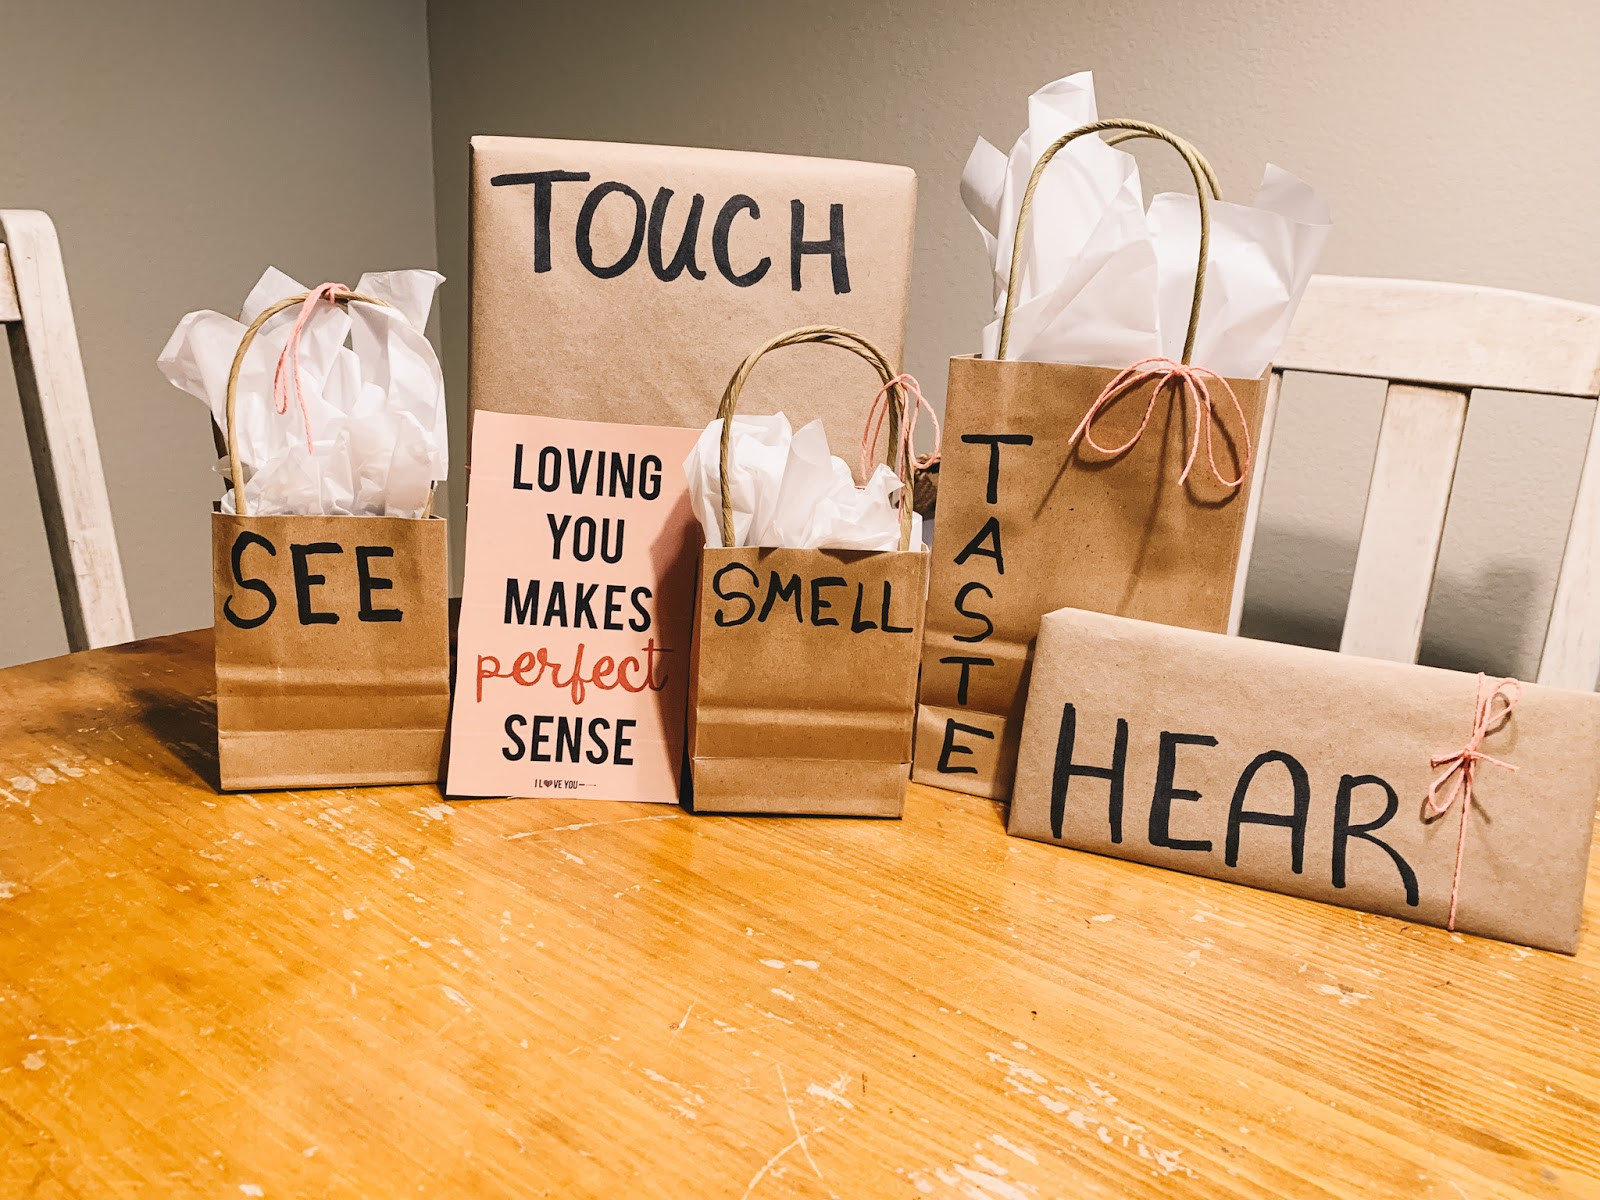 Creative Valentines Gift Ideas For Him
 The 5 Senses Valentines Day Gift Ideas for Him & Her